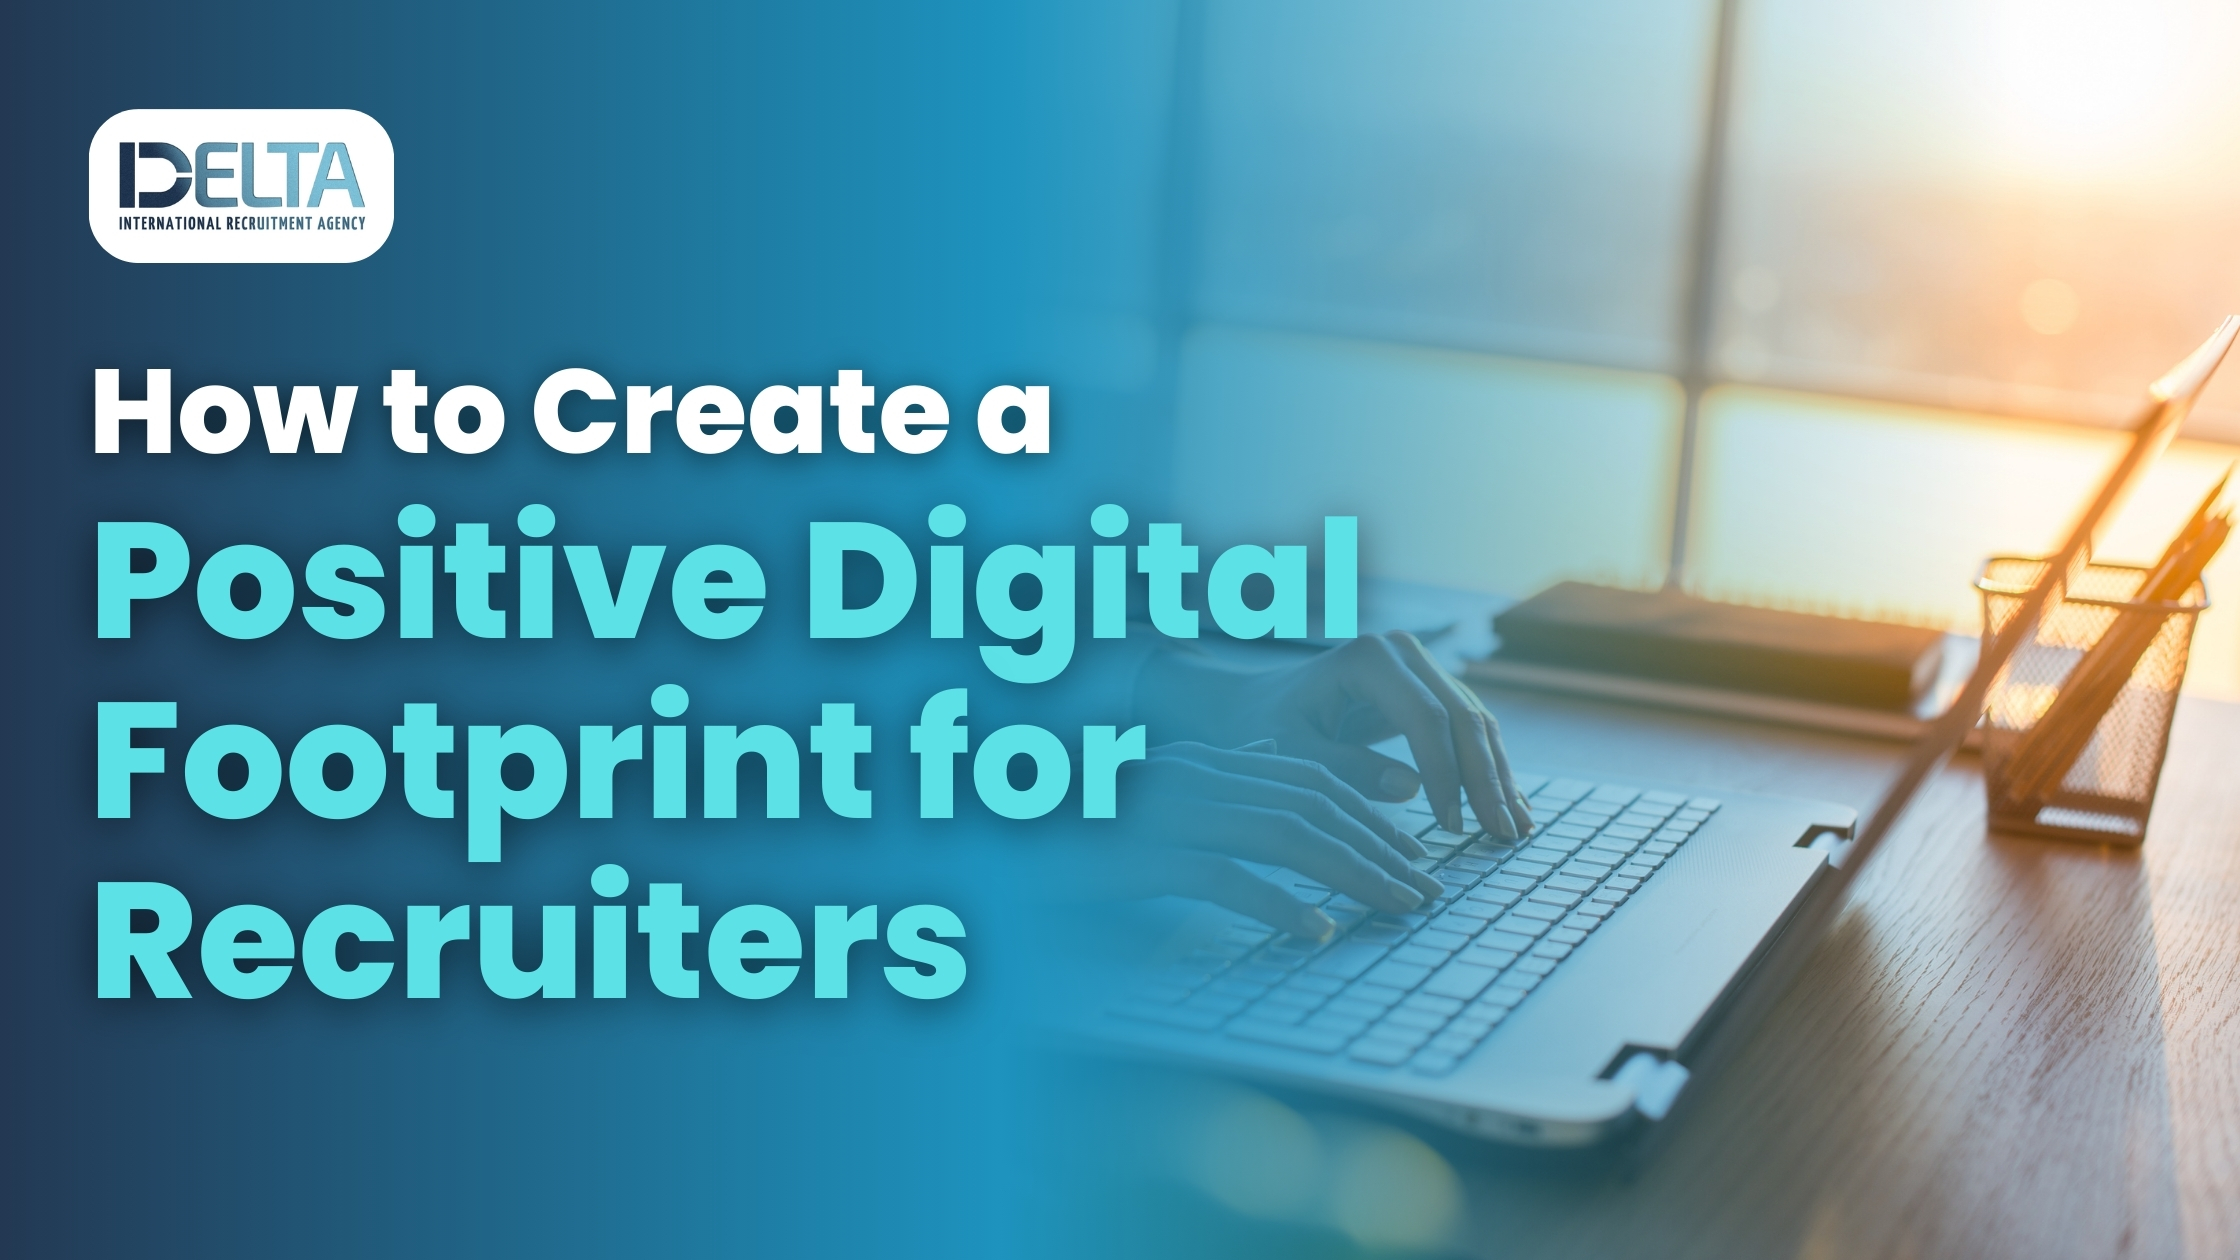 How to Create a Positive Digital Footprint for Recruiters?